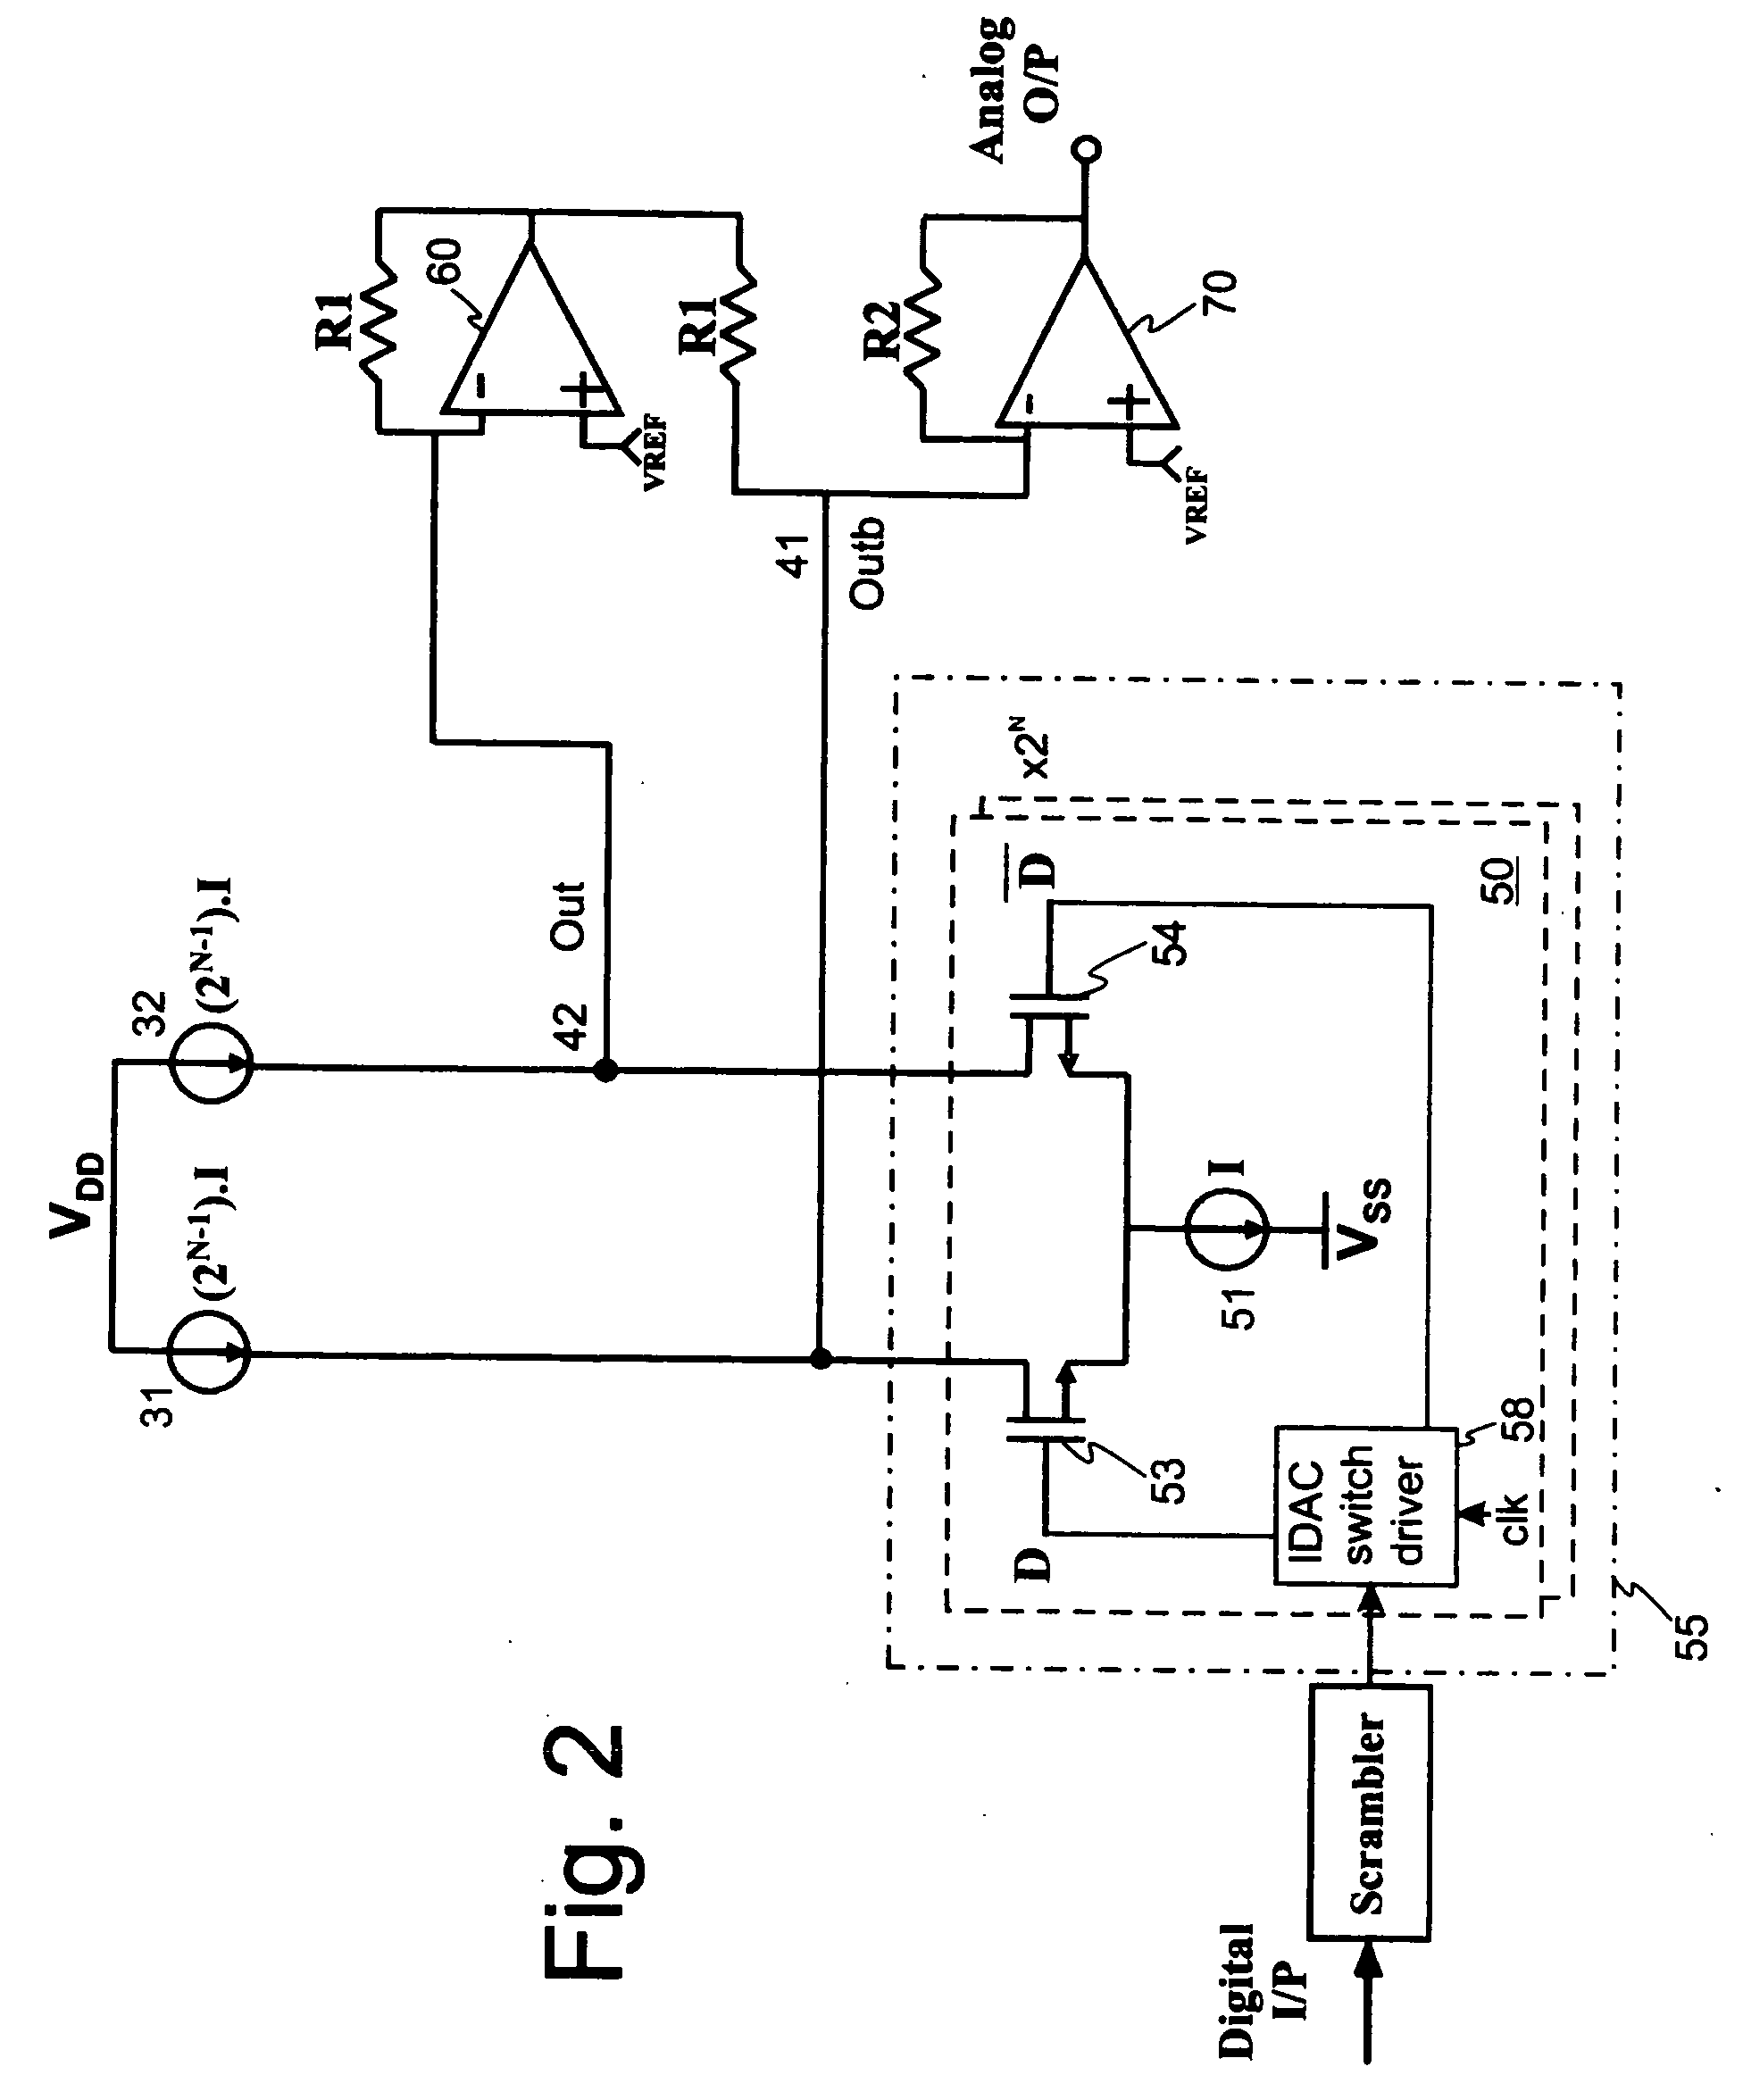 Continuous-time-sigma-delta DAC using chopper stabalisation